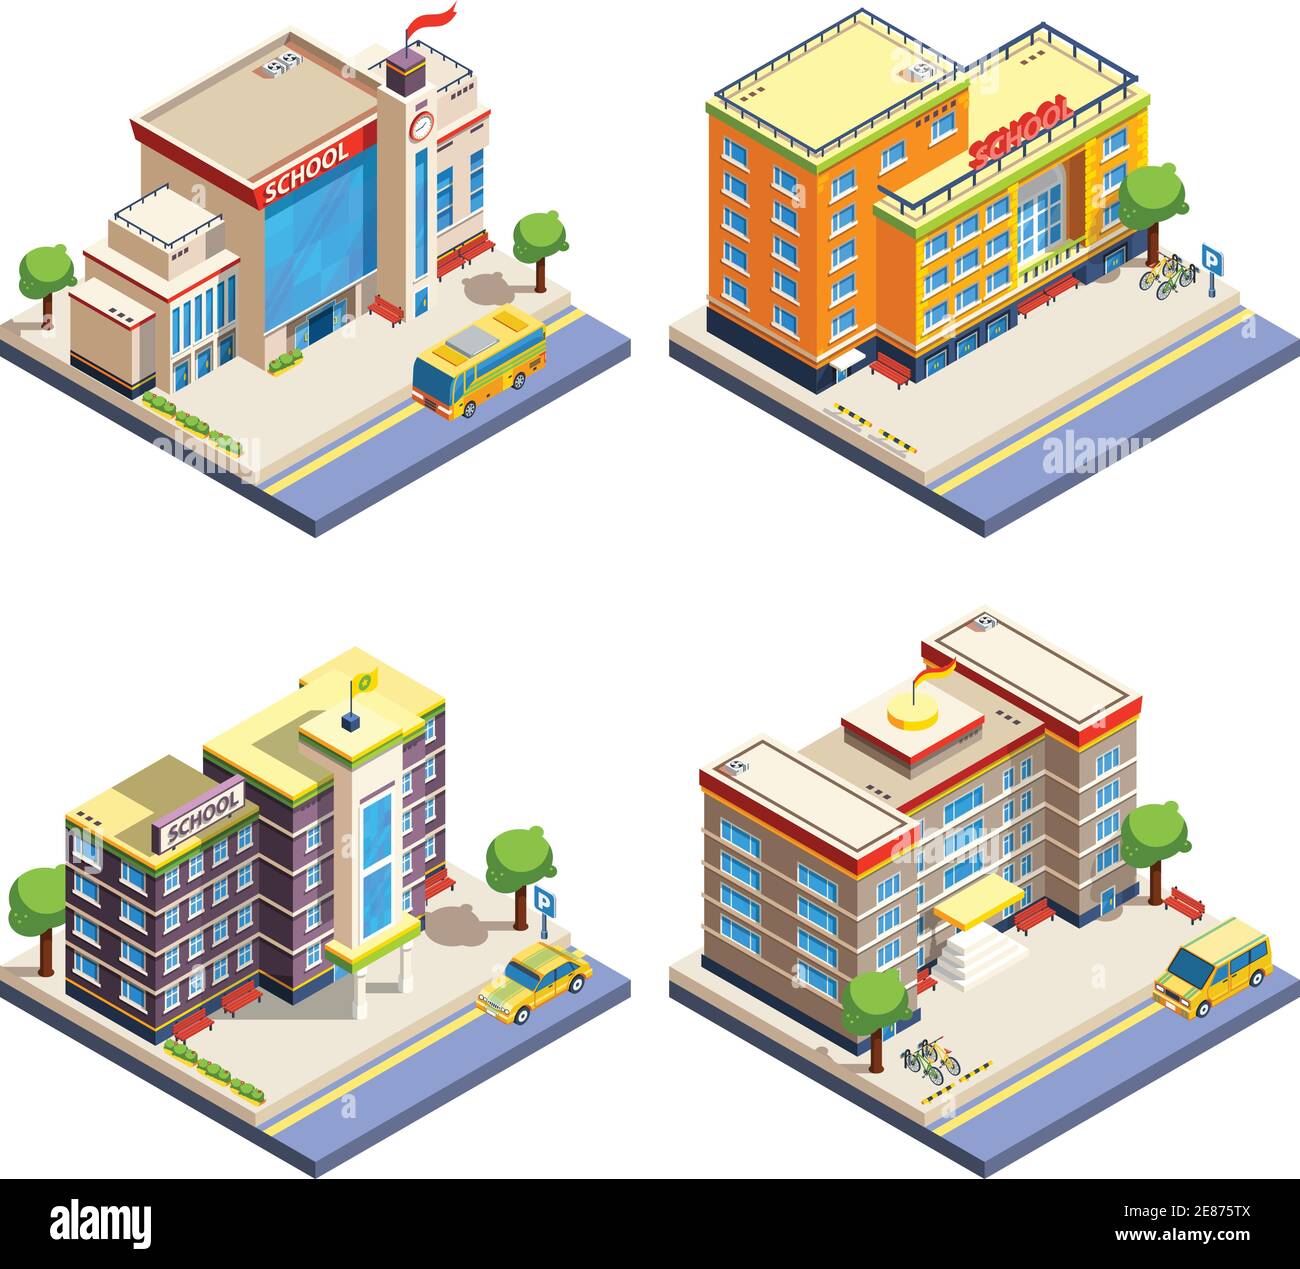 https://c8.alamy.com/comp/2E875TX/modern-many-storeyed-school-buildings-with-cars-bicycles-and-school-bus-isometric-icons-set-on-white-background-isolated-vector-illustration-2E875TX.jpg